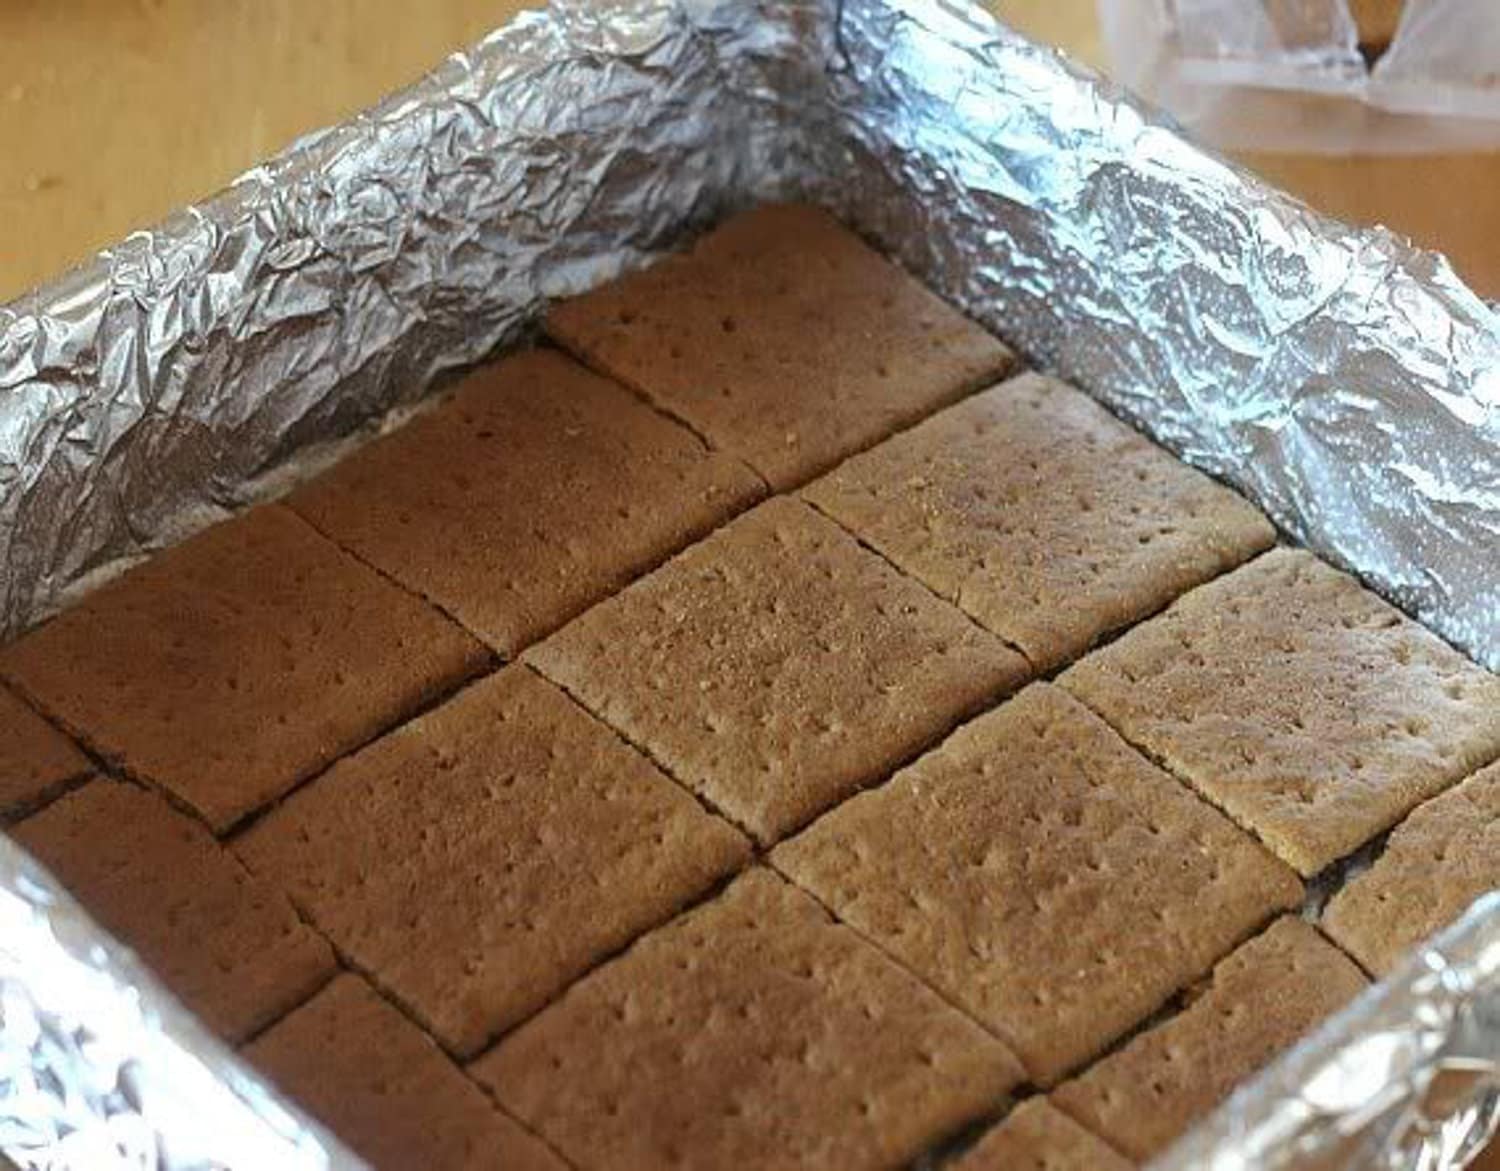 Graham crackers placed in a 9x9 pan